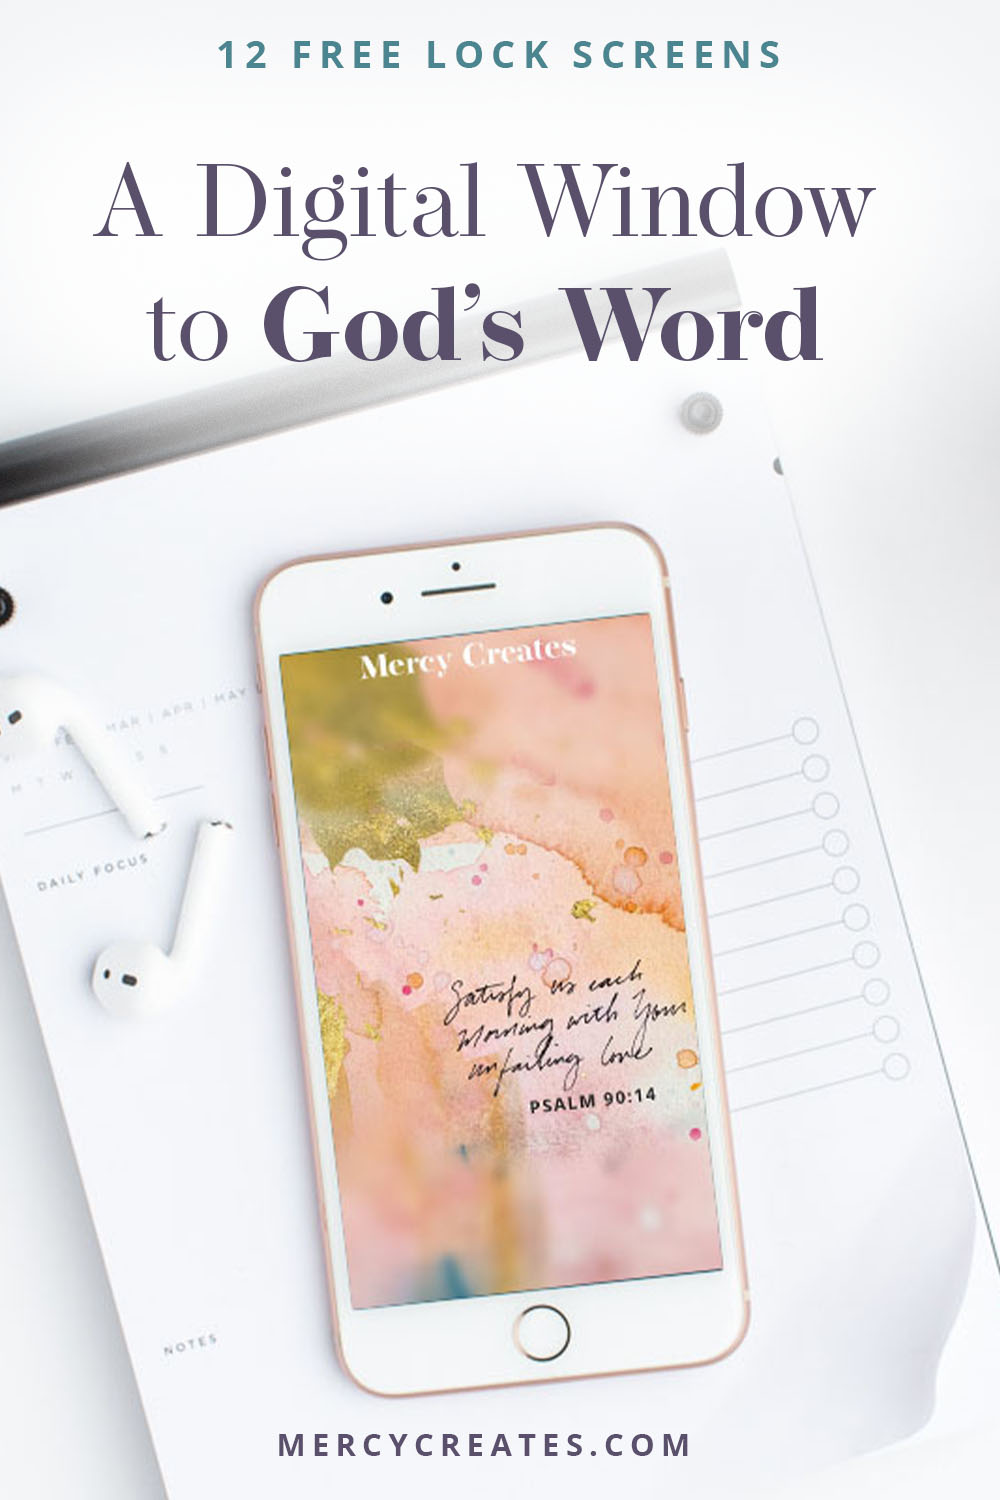 In a world where we check our phones more frequently than we'd like to admit, this blog post explores how we can turn this habit into a spiritual practice.